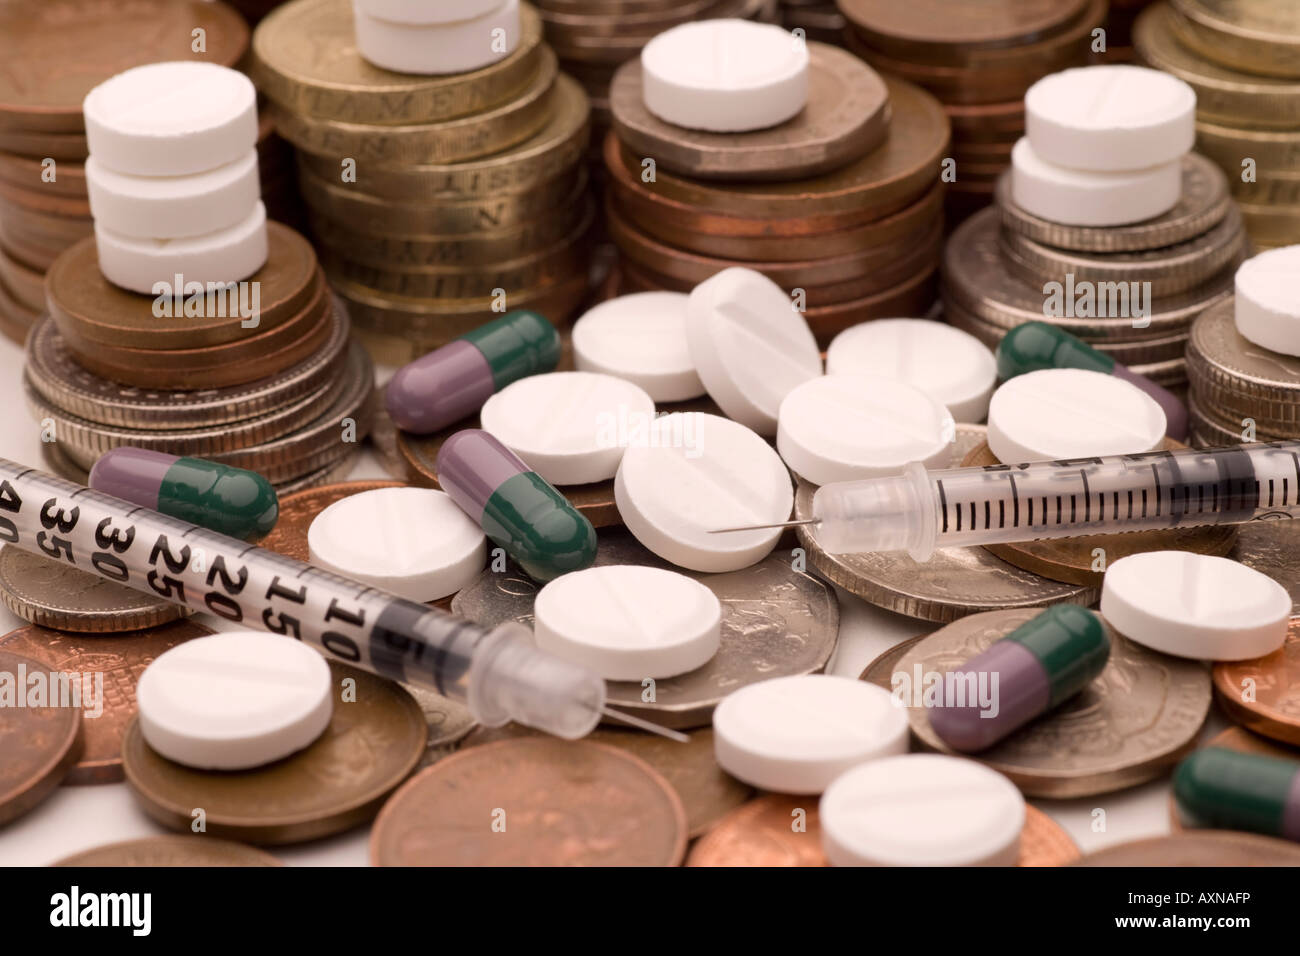 Pharmaceutical companies making huge profits out of healthcare products drugs coins and syringes Stock Photo